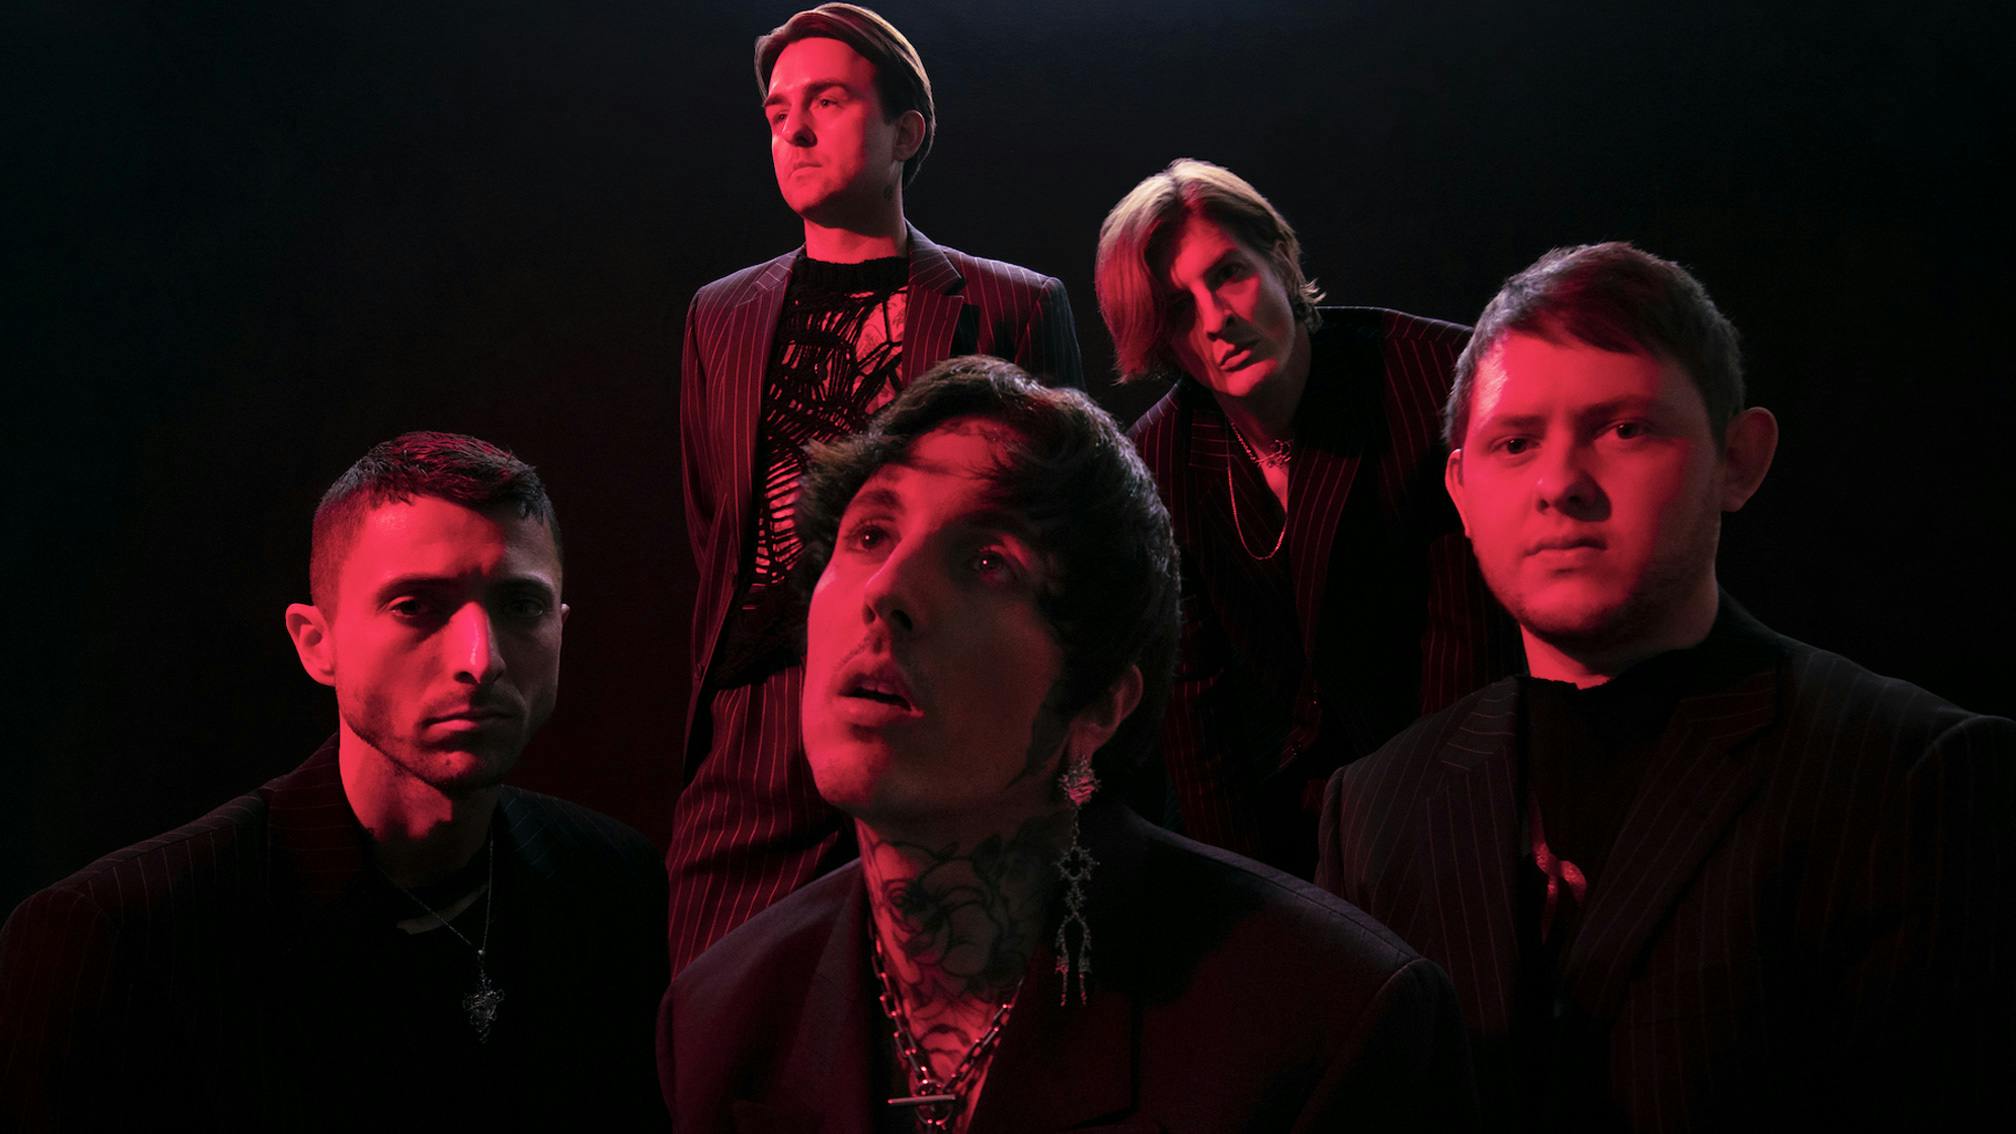 Here’s when Bring Me The Horizon are releasing their new single LosT